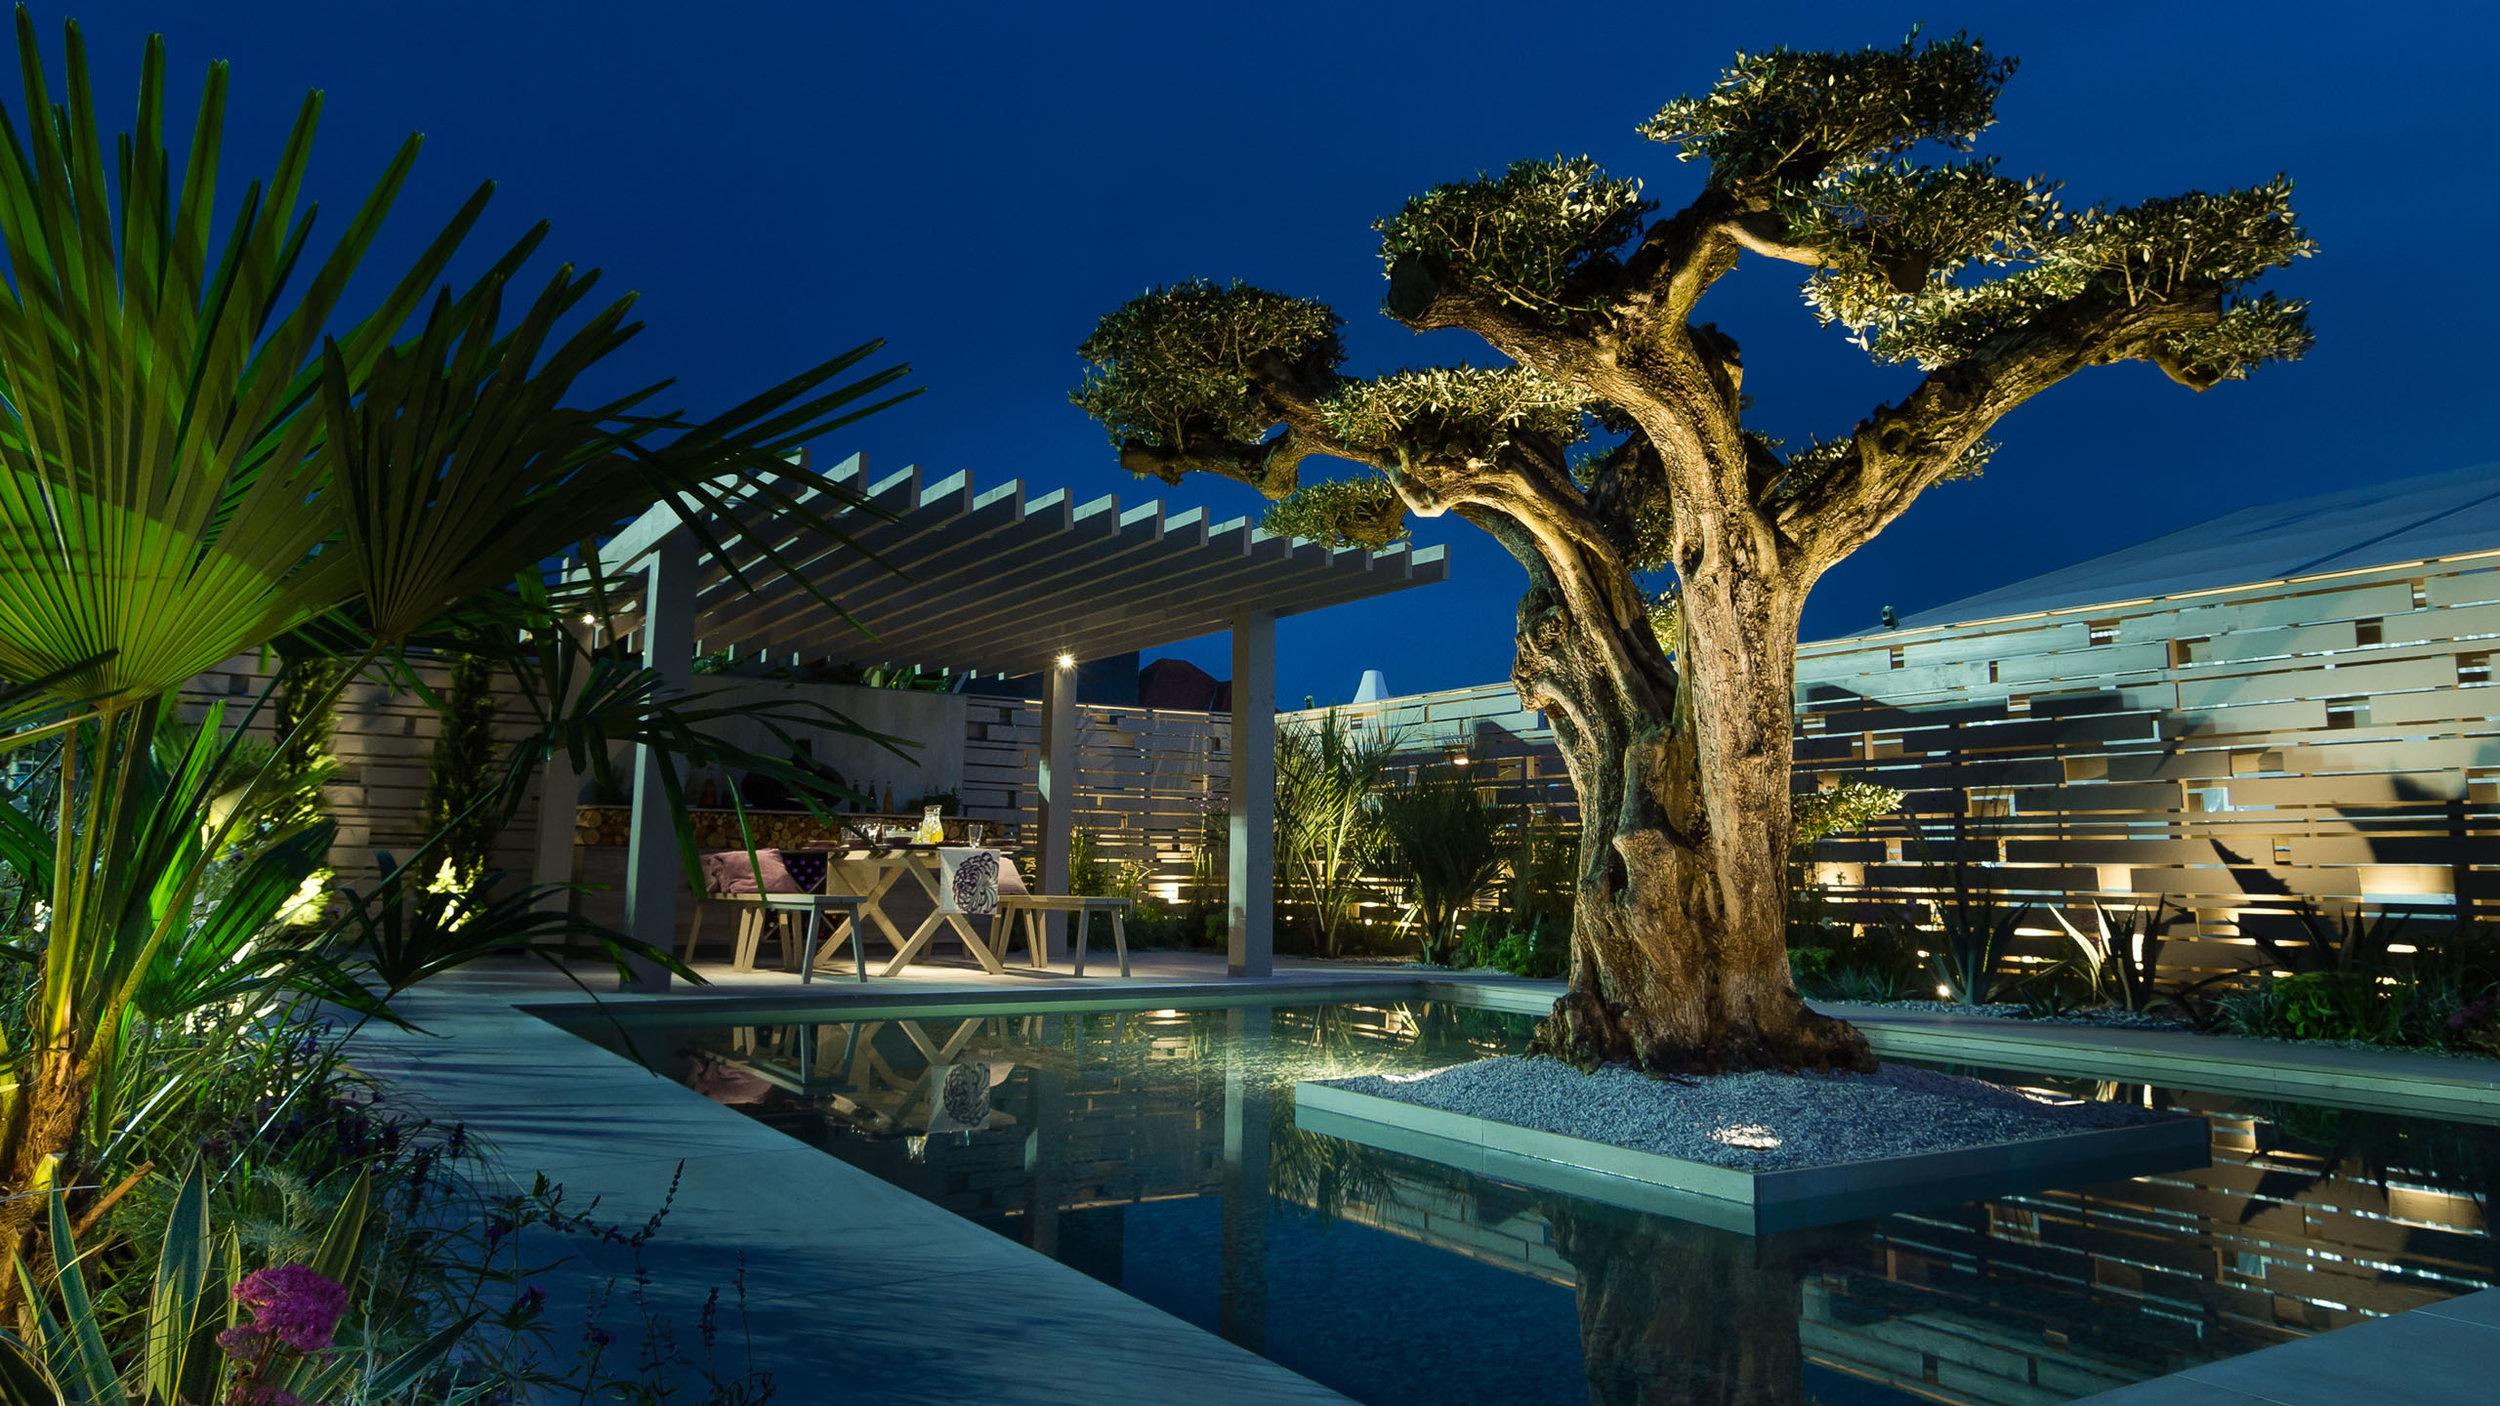 Southport Garden Design: A View Of The Olive Tree By Night